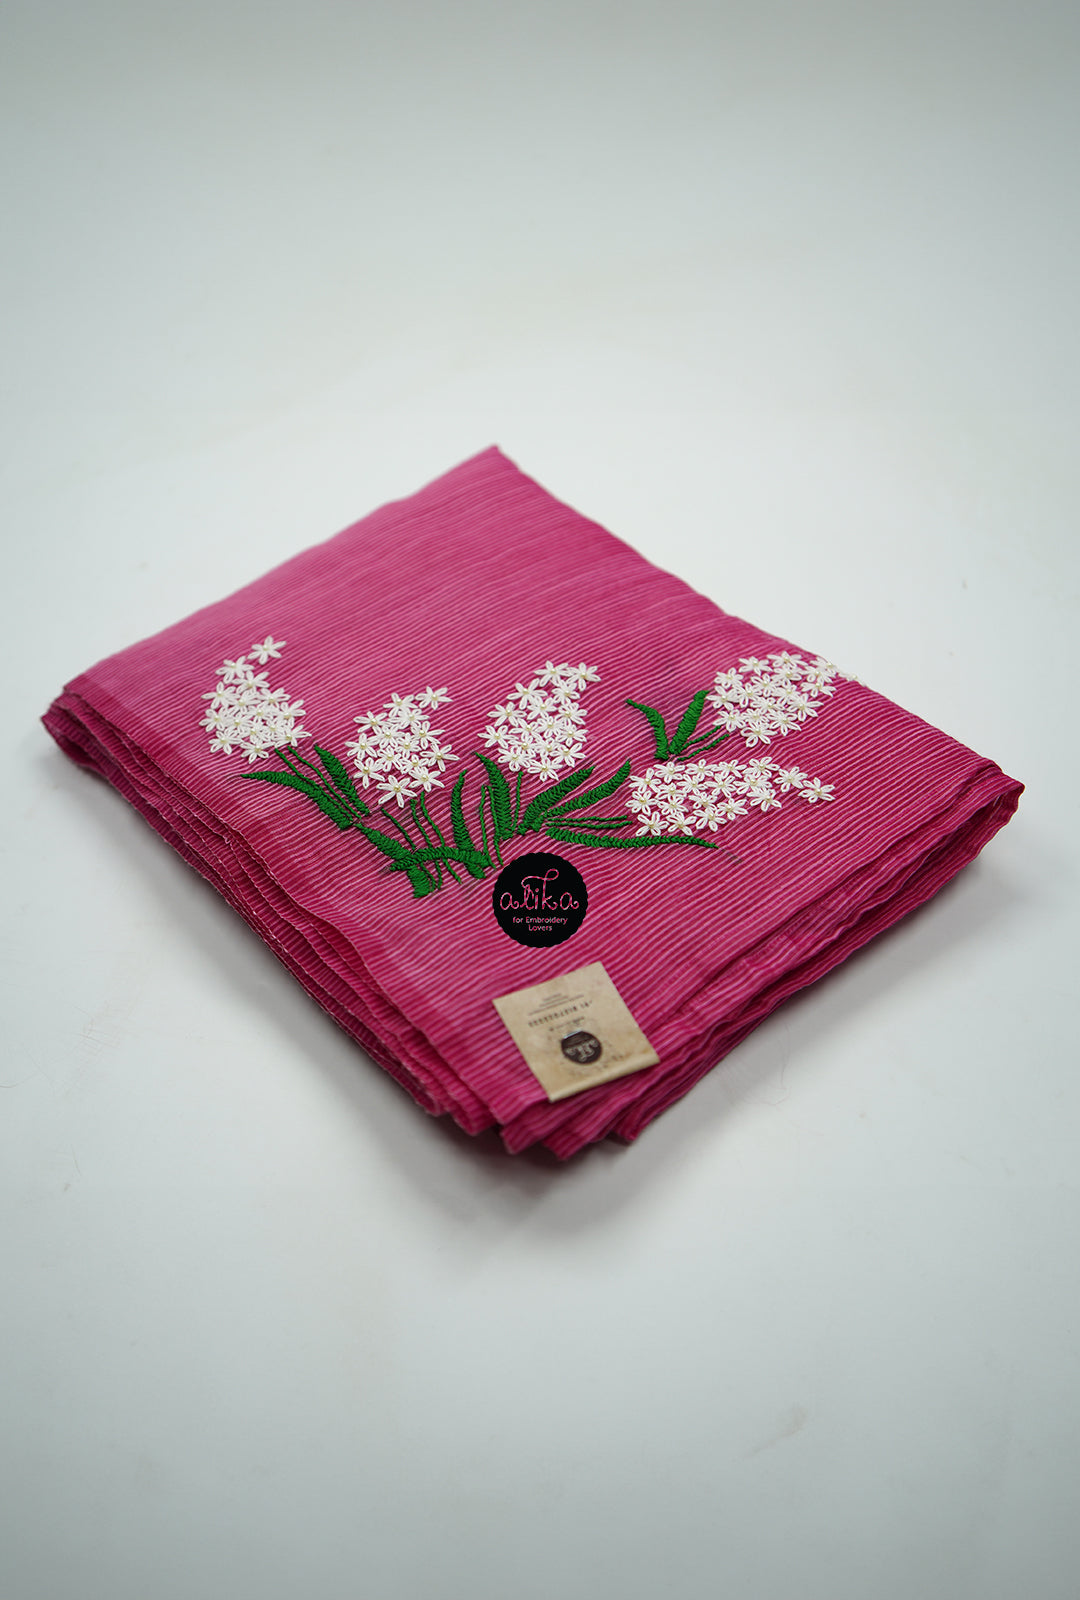 PINK  STRIPED KOTA SAREE  WITH WHITE LAZY DAISY FLORAL WORK